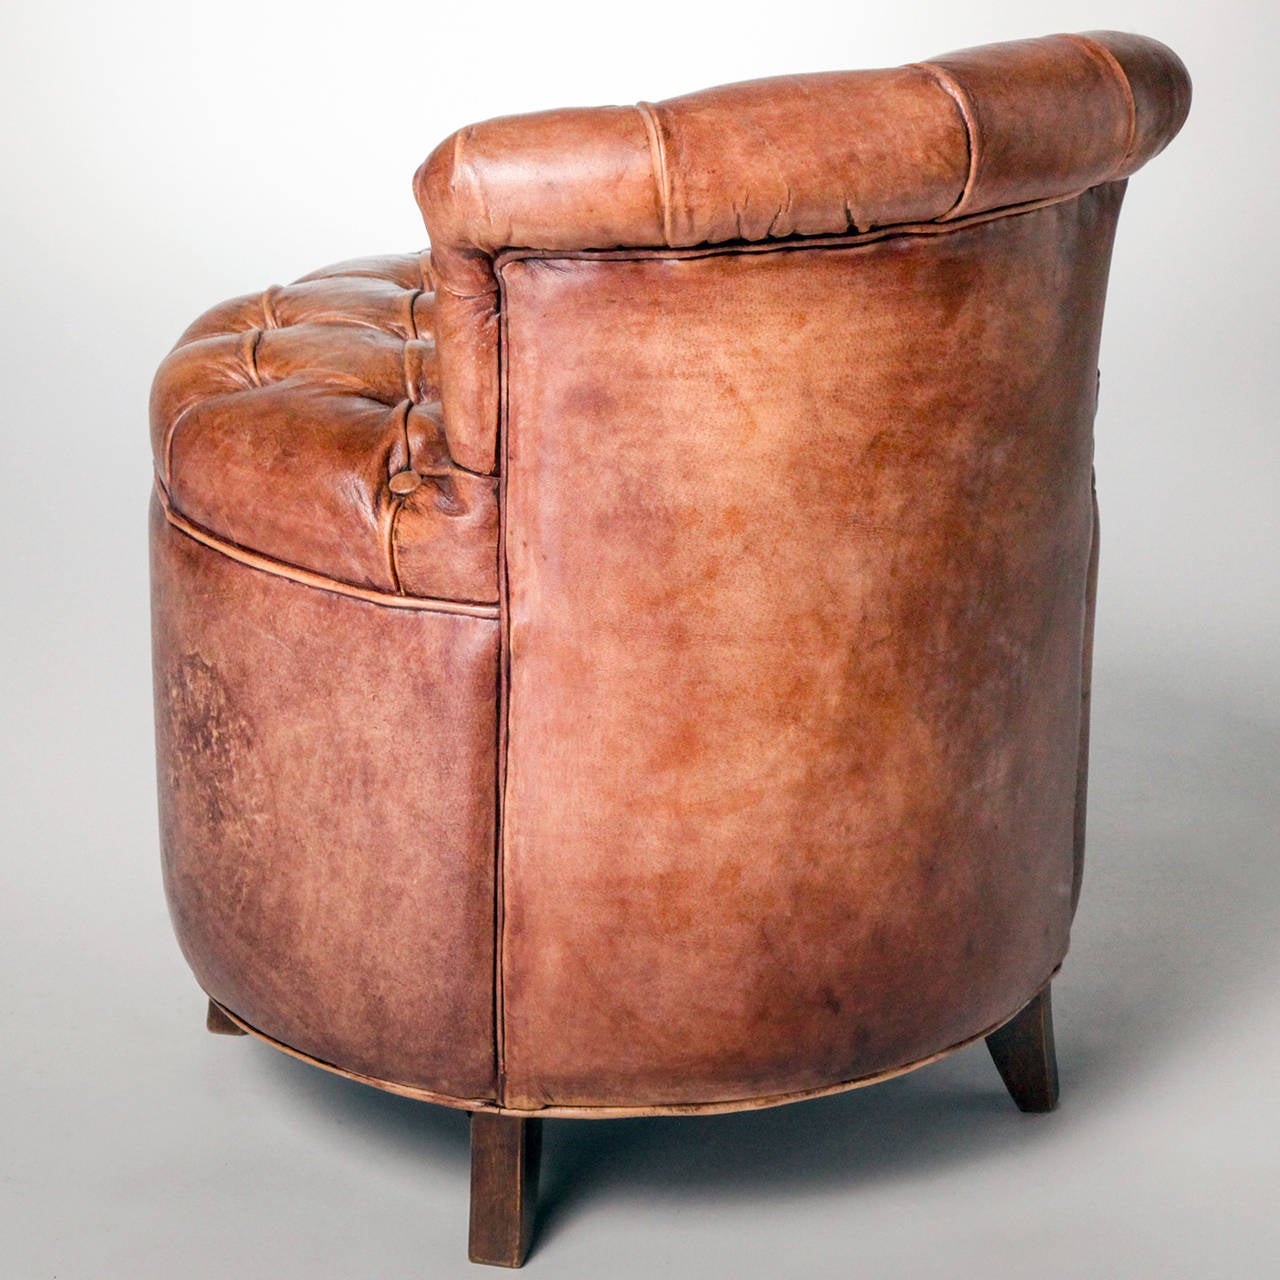 Small handmade tufted brown leather boudoir chair. Greta Garbo style accent chair. Limited edition; only two produced.